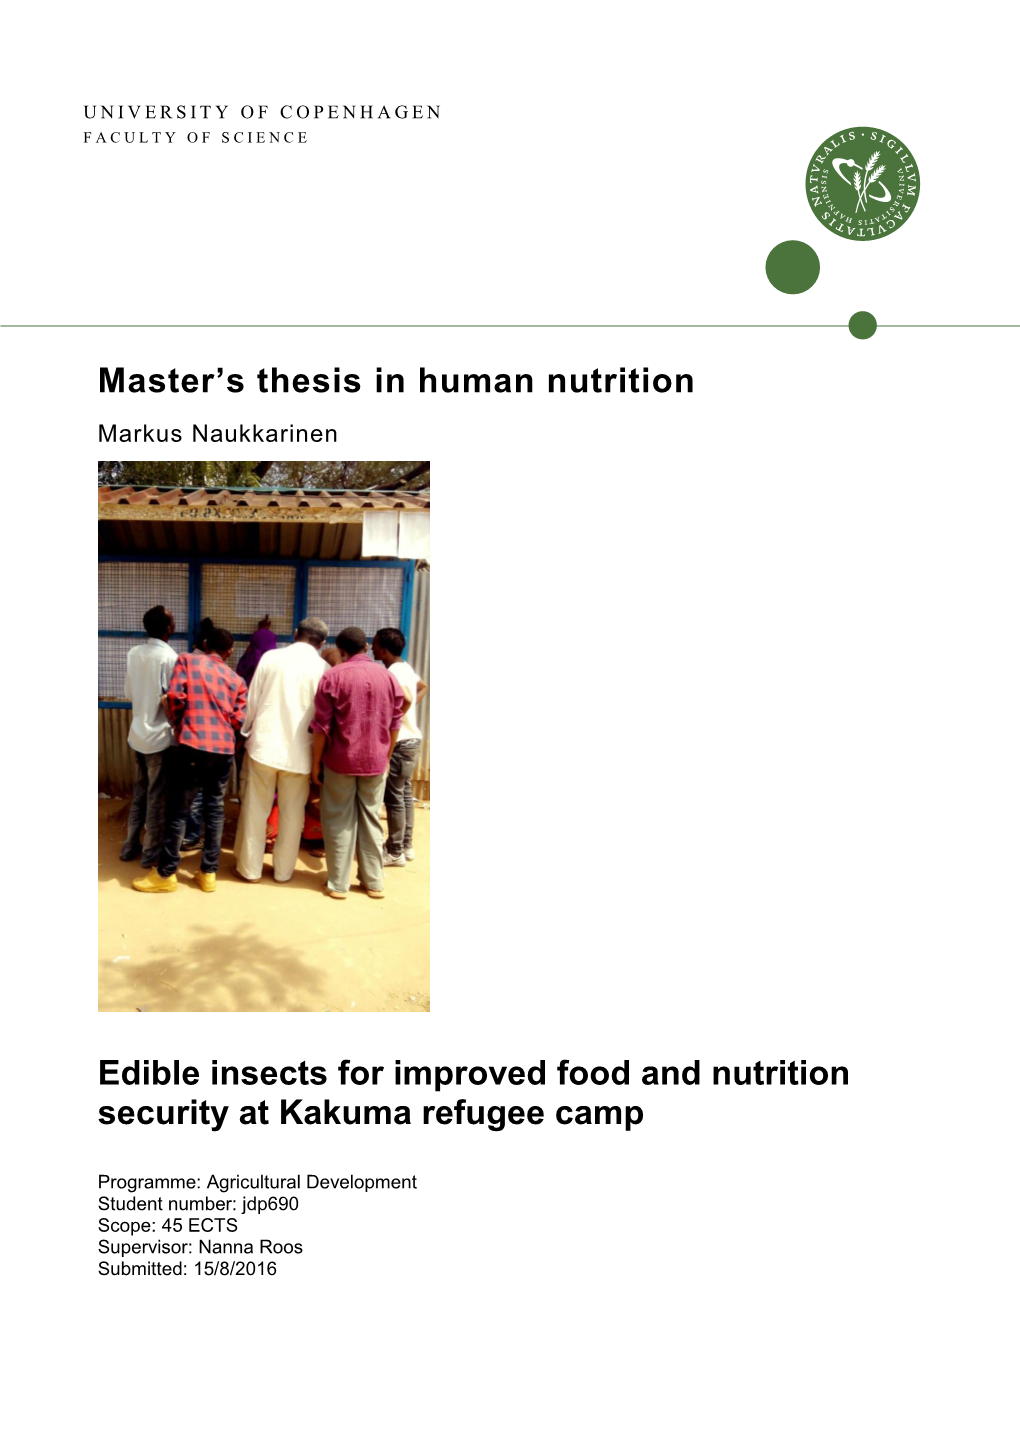 Edible Insects for Improved Food and Nutrition Security at Kakuma Refugee Camp